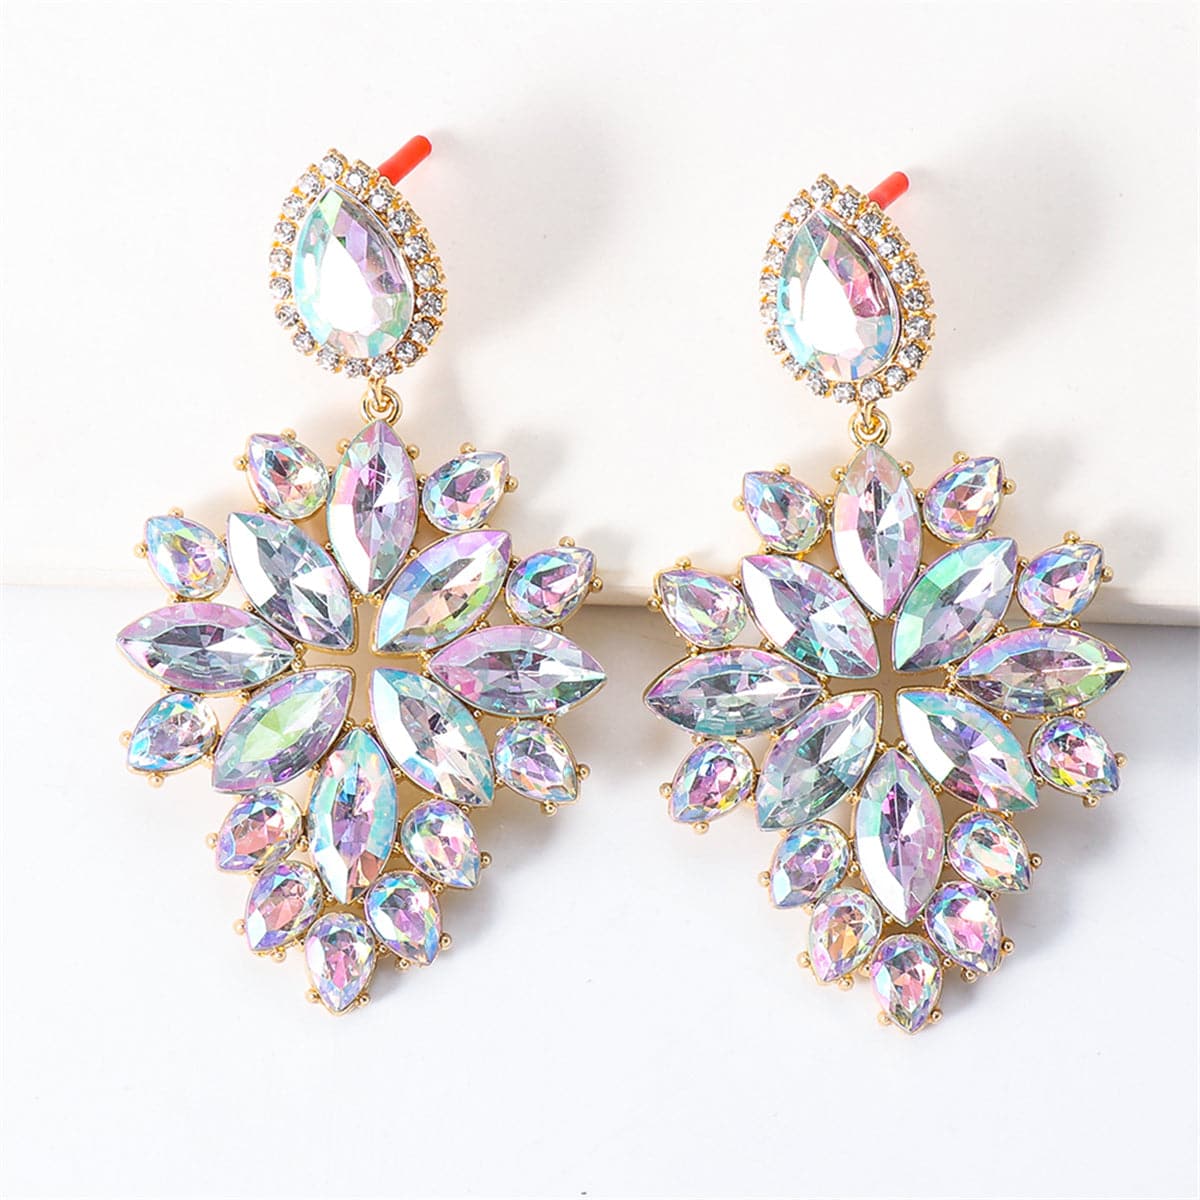 Crystal & Cubic Zirconia Marquise Cluster Drop Earrings